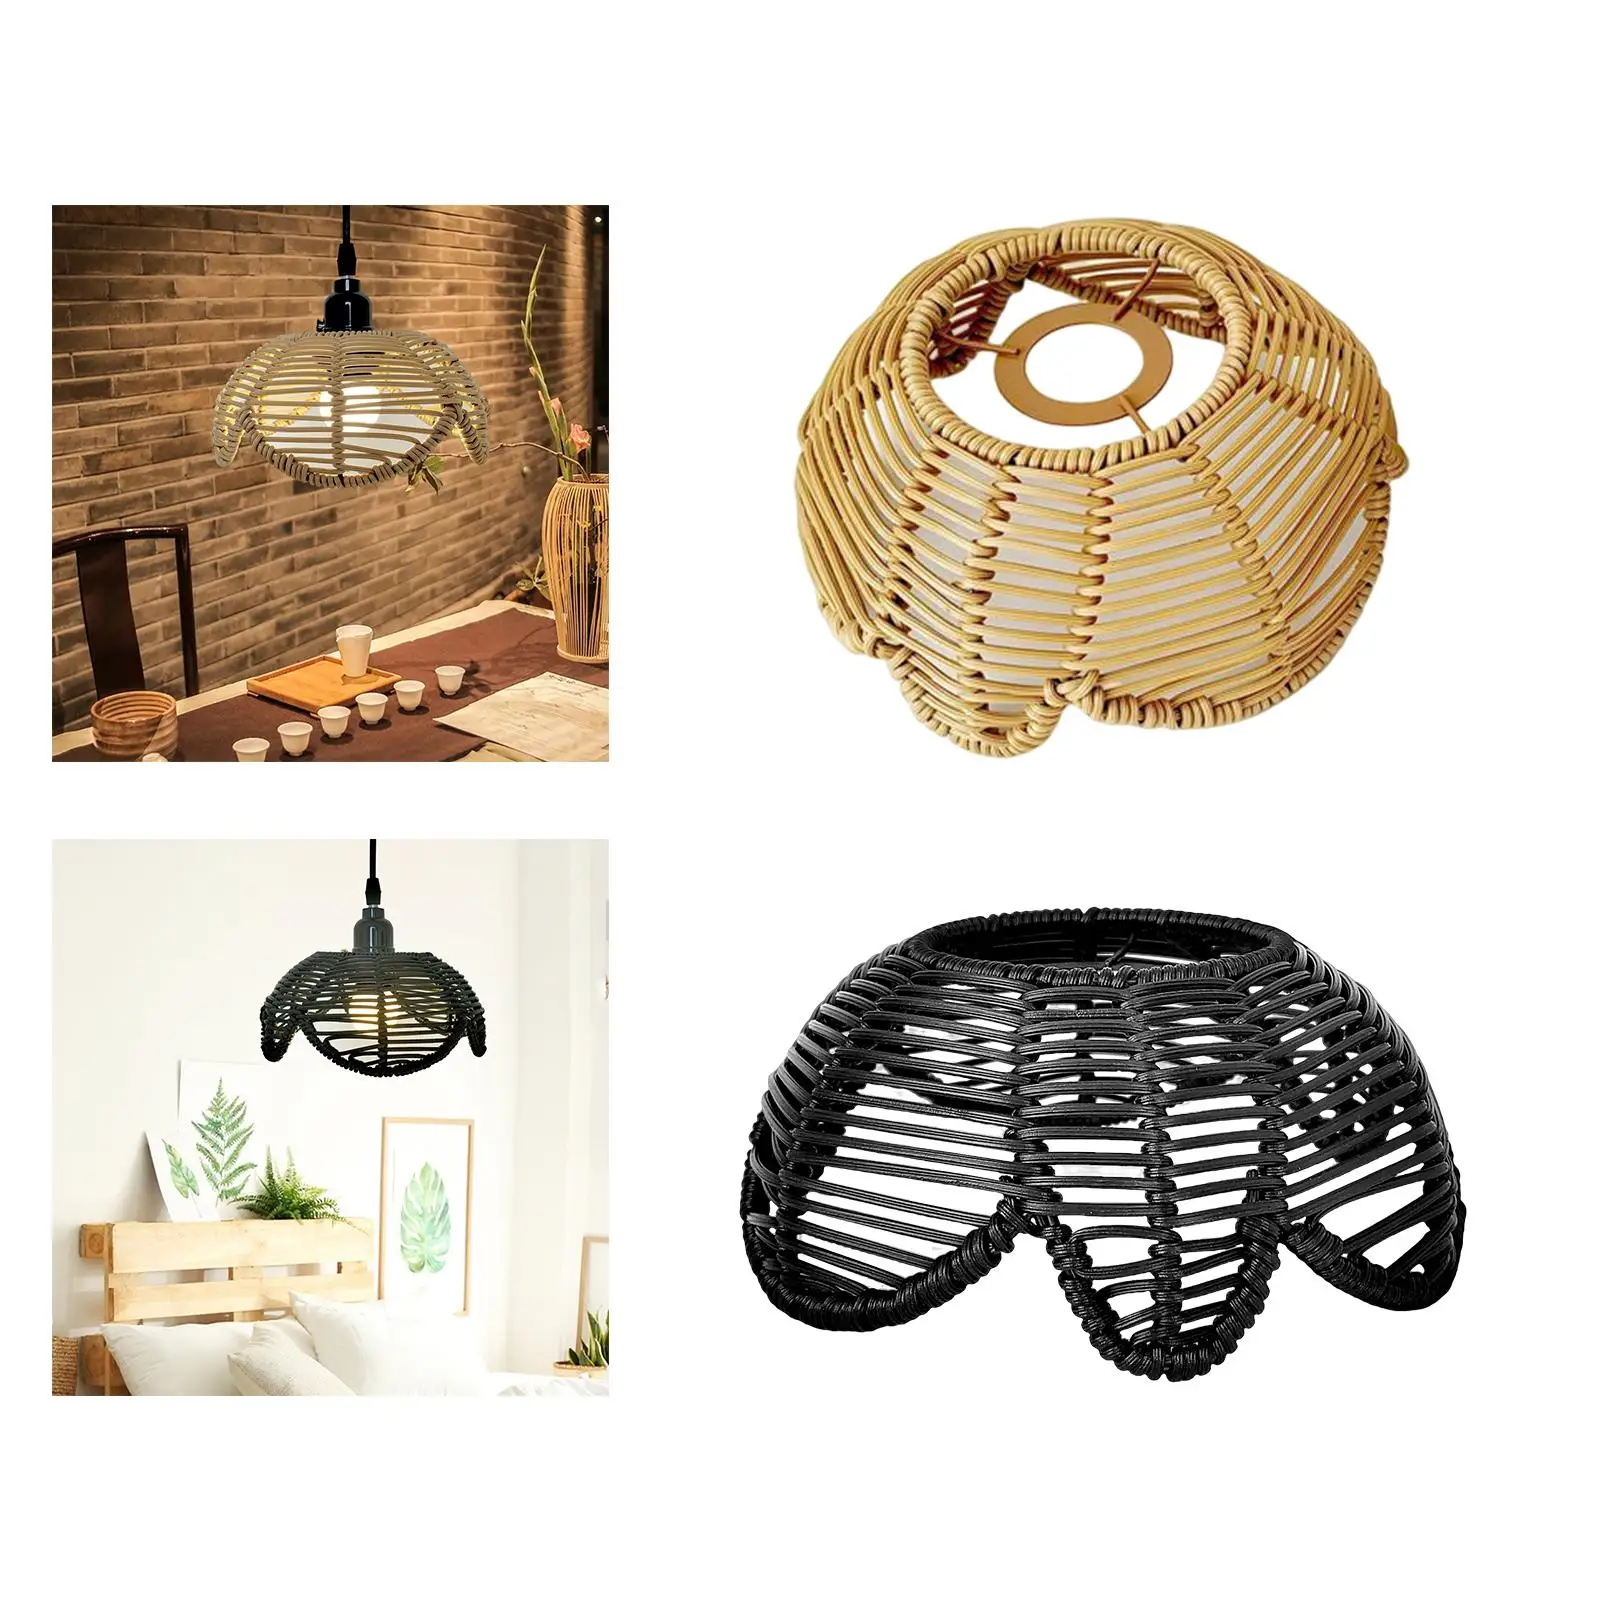 Handwoven Rattan Lampshade Decor Light Fixture Shade Creative Ceiling Pendant Light Cover for Cafe Kitchen Restaurant Hotel